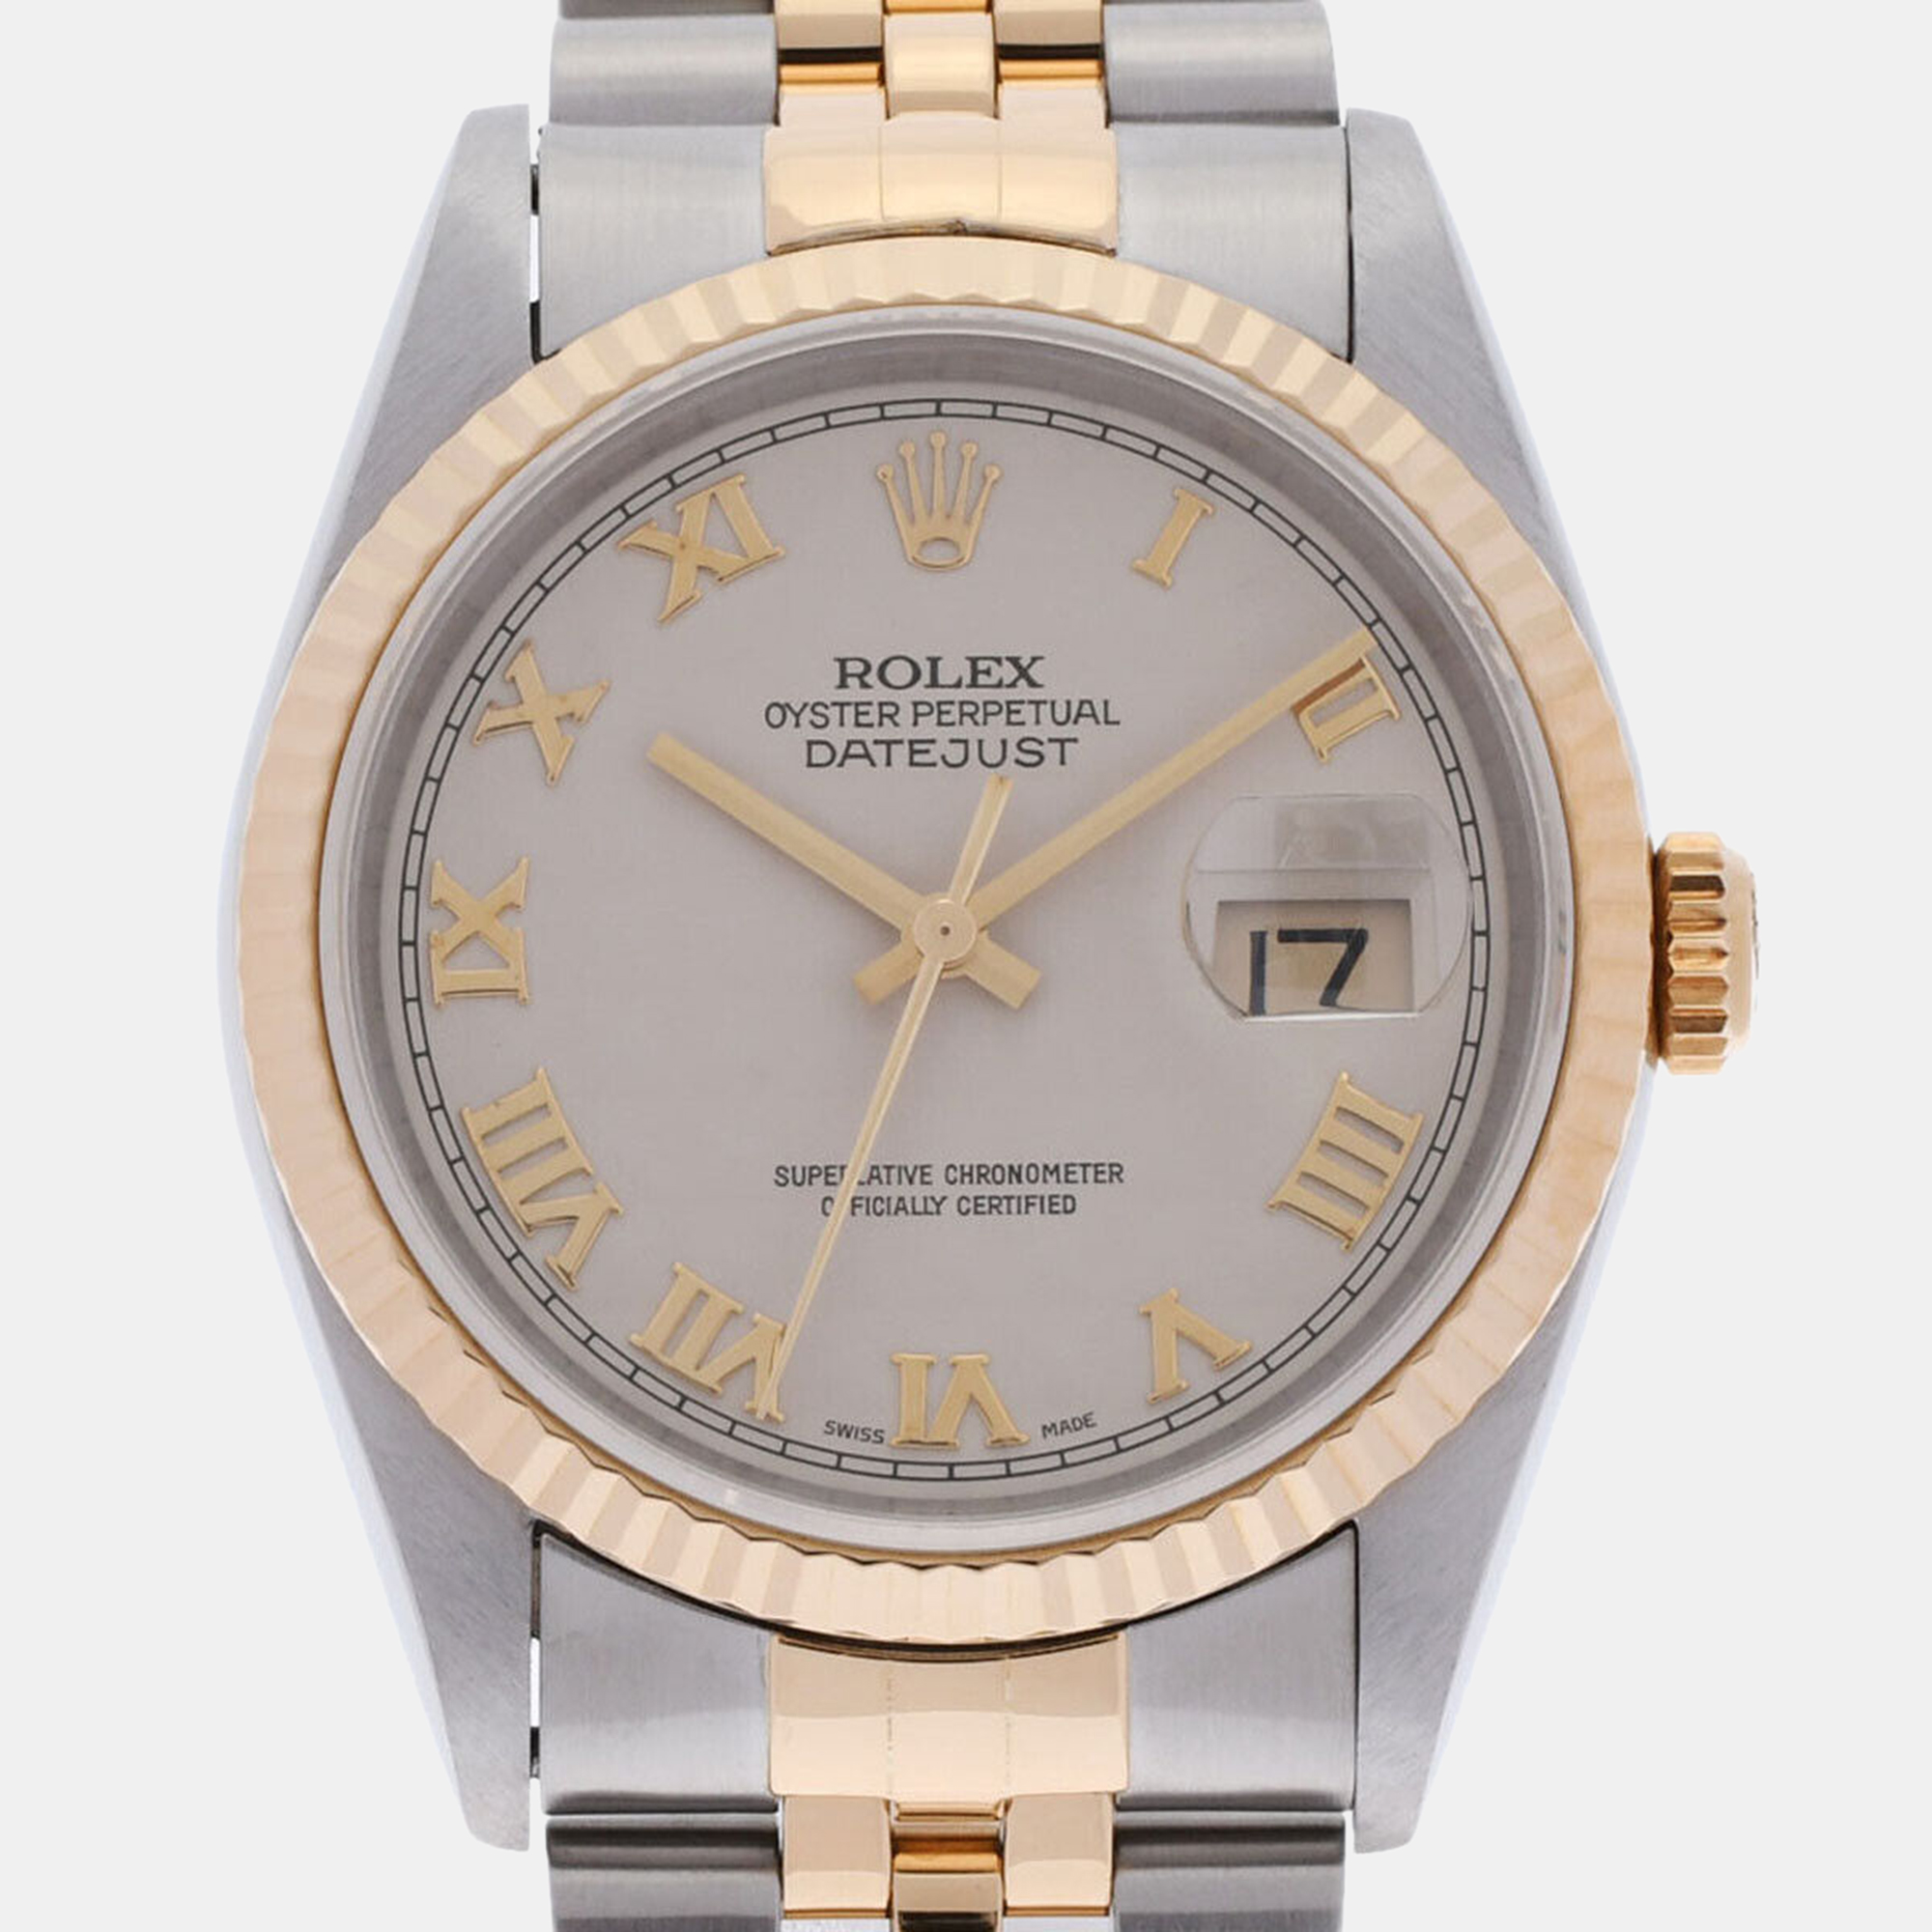 Rolex White 18k Yellow Gold Stainless Steel Datejust 16233 Automatic Men's Wristwatch 36 Mm